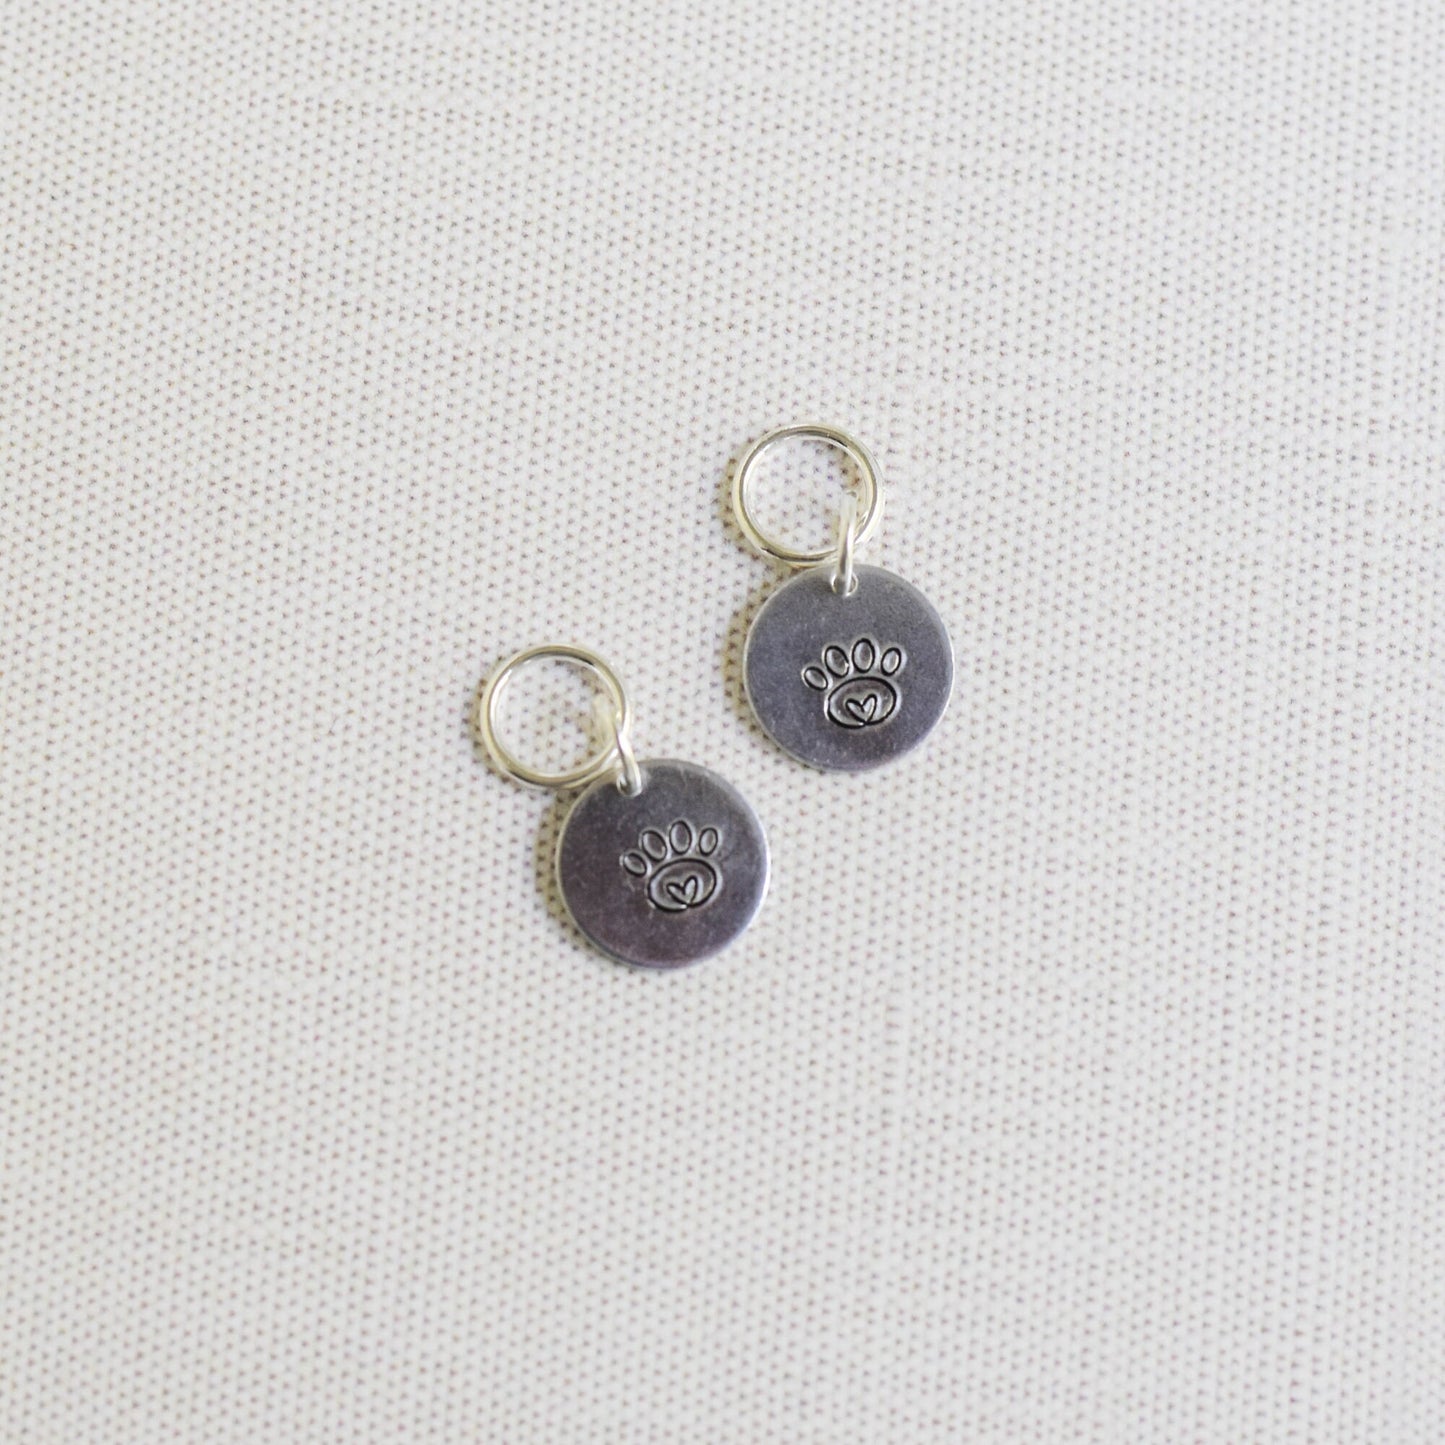 Set of 2 Hand Stamped Stitch Markers - Paw Love